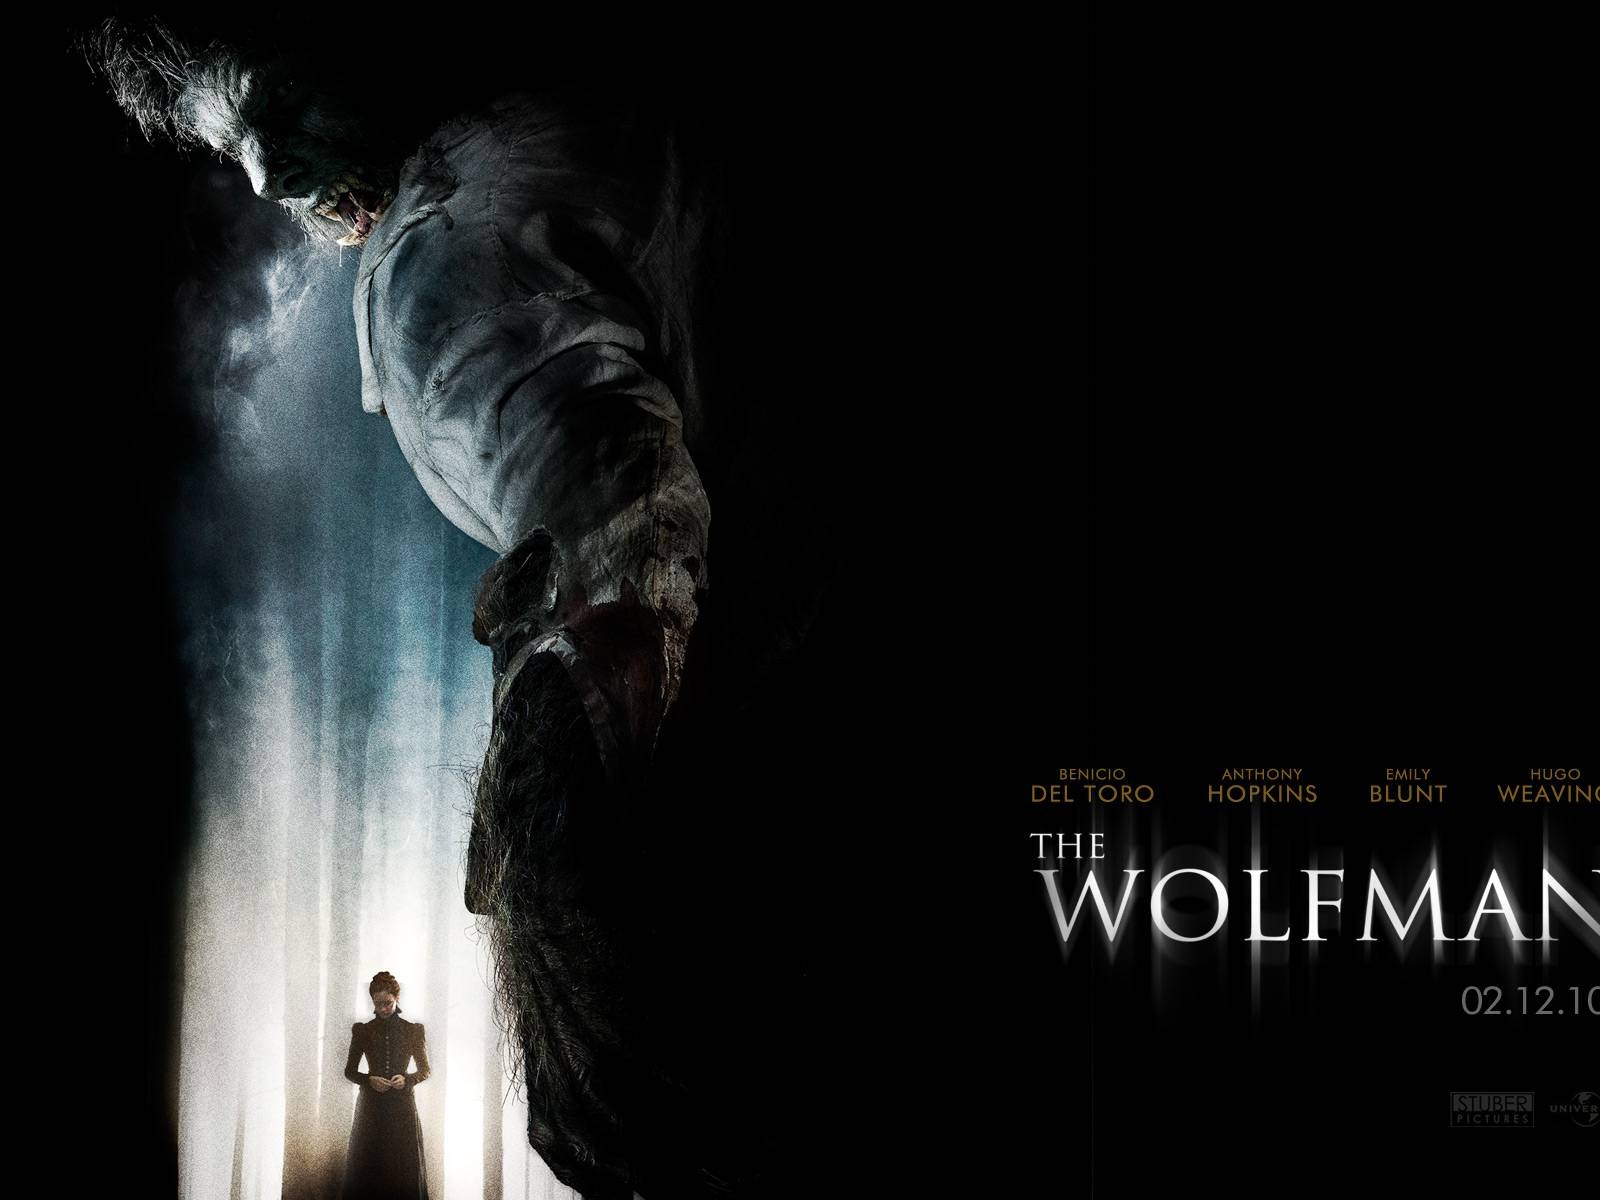 The Wolfman Movie Wallpapers #6 - 1600x1200